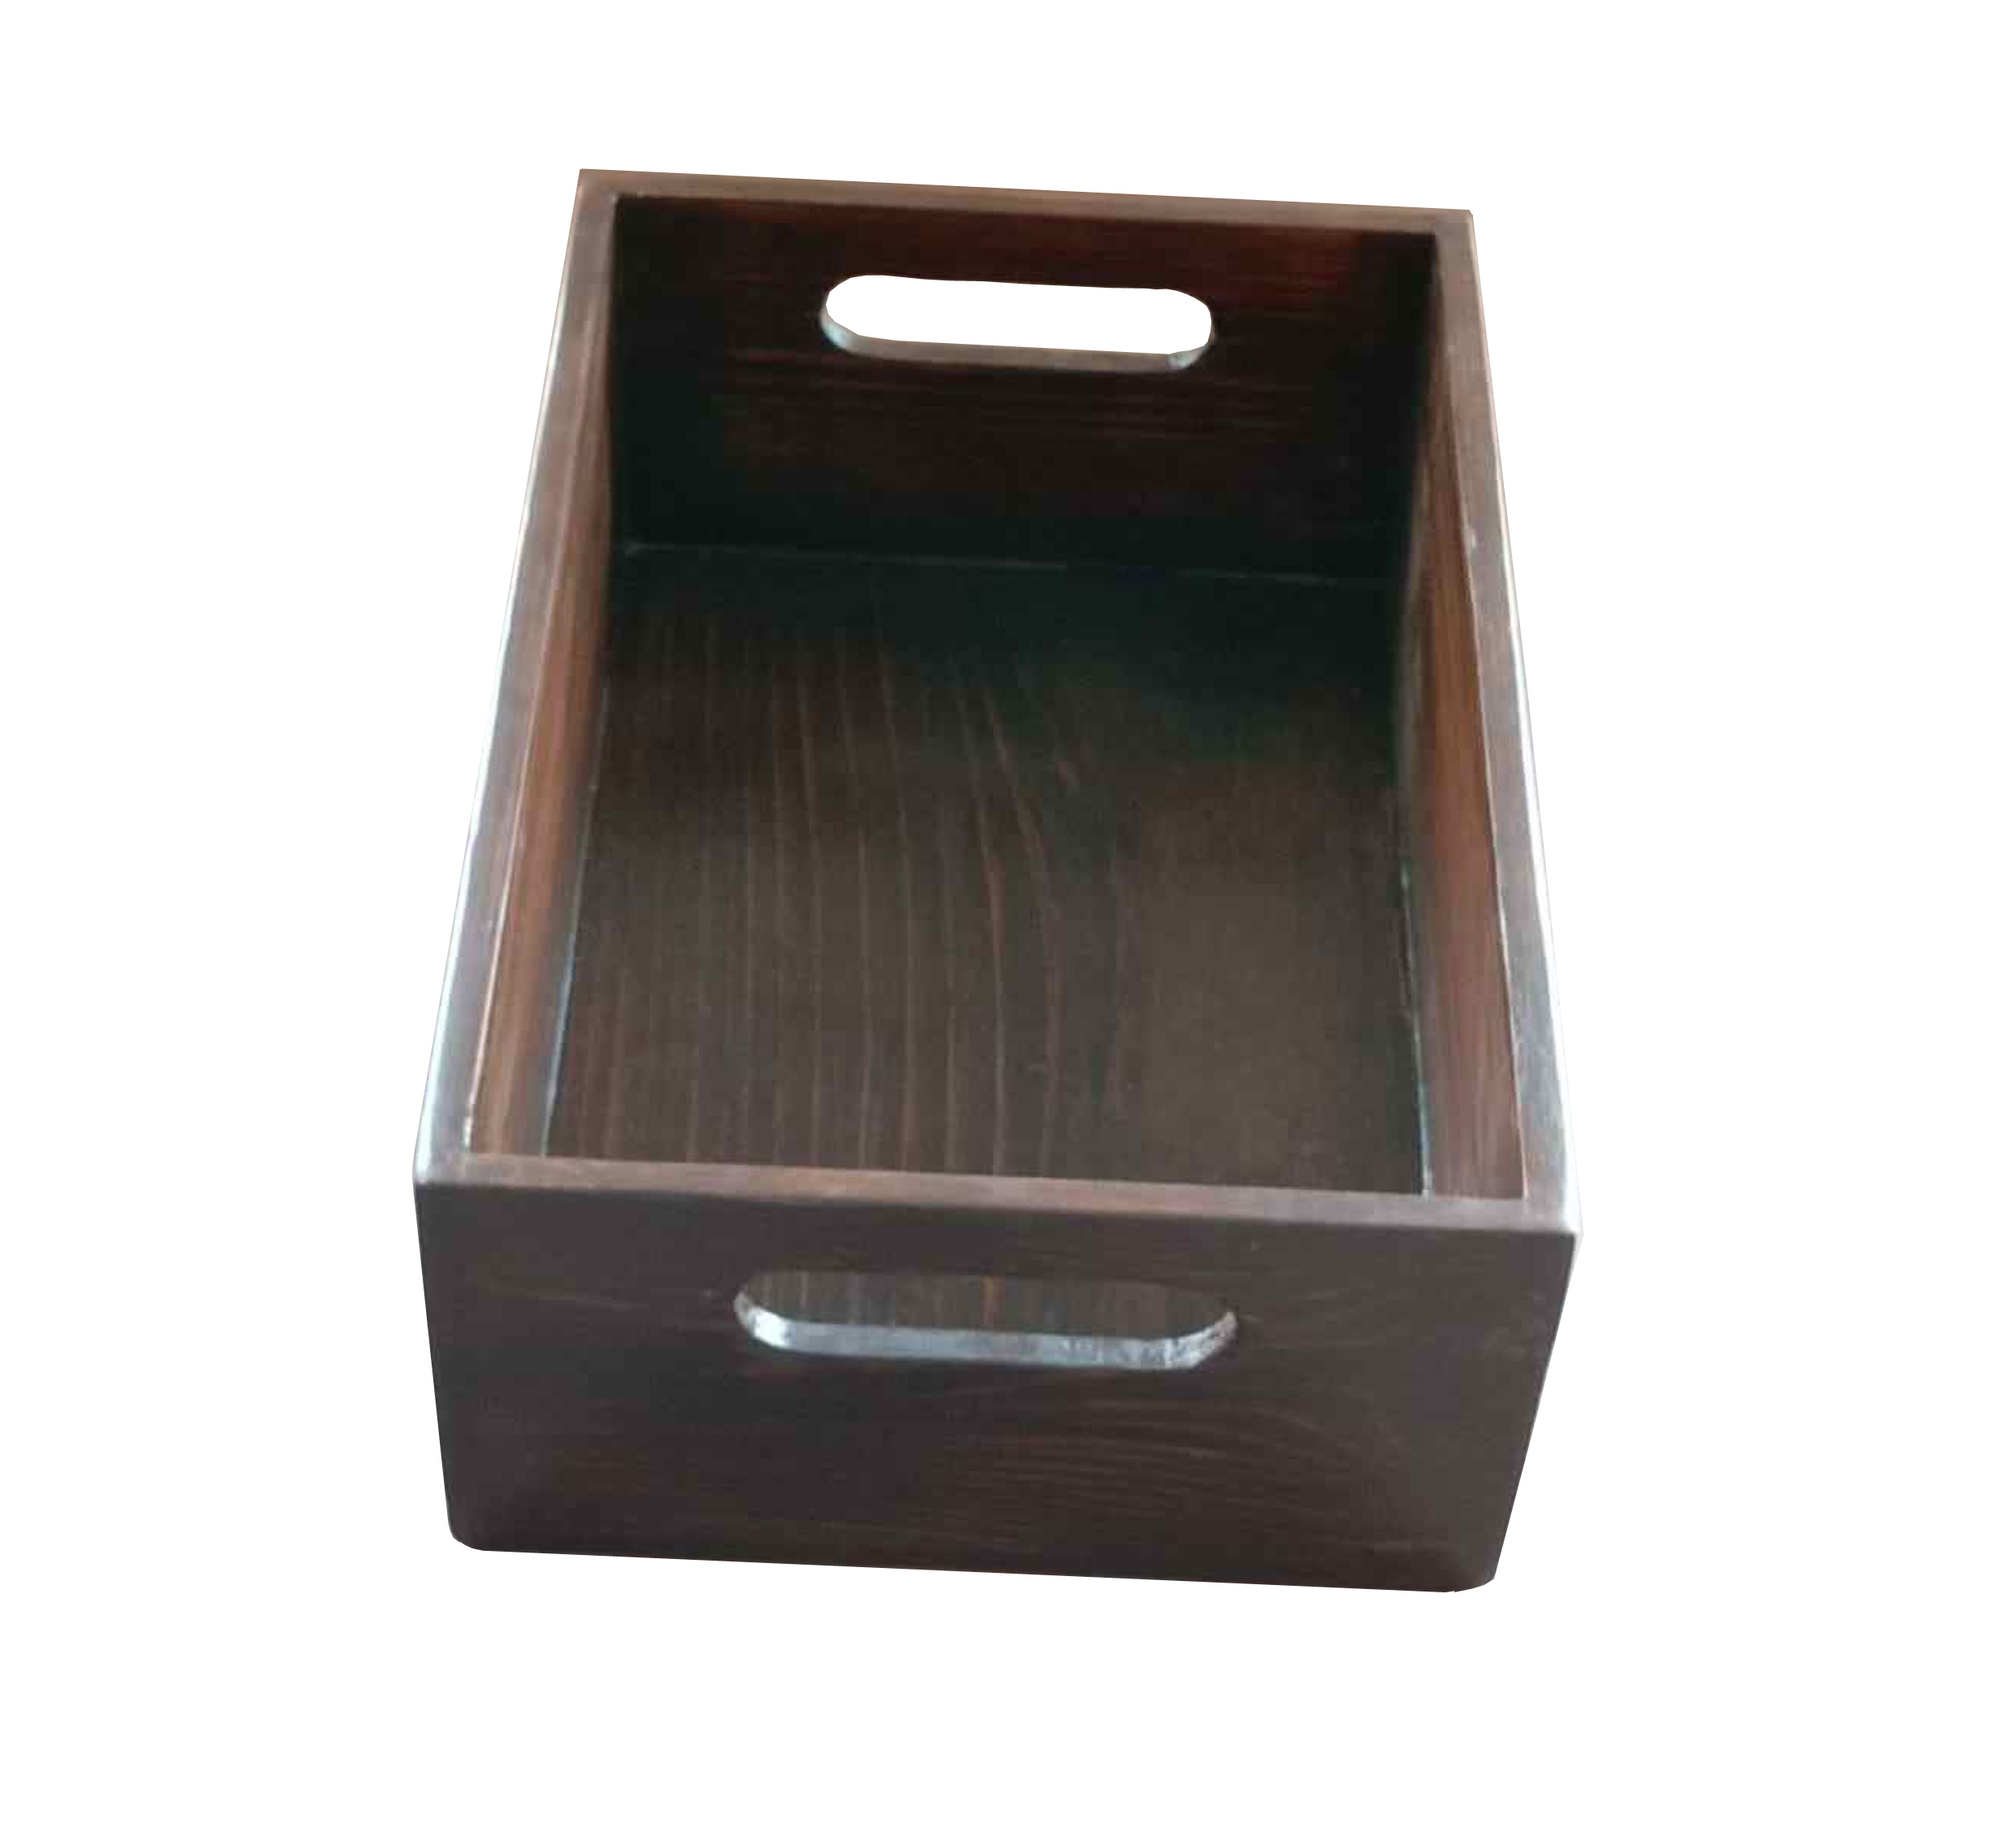 Wooden Storage and Gift Boxes cum Organisers.